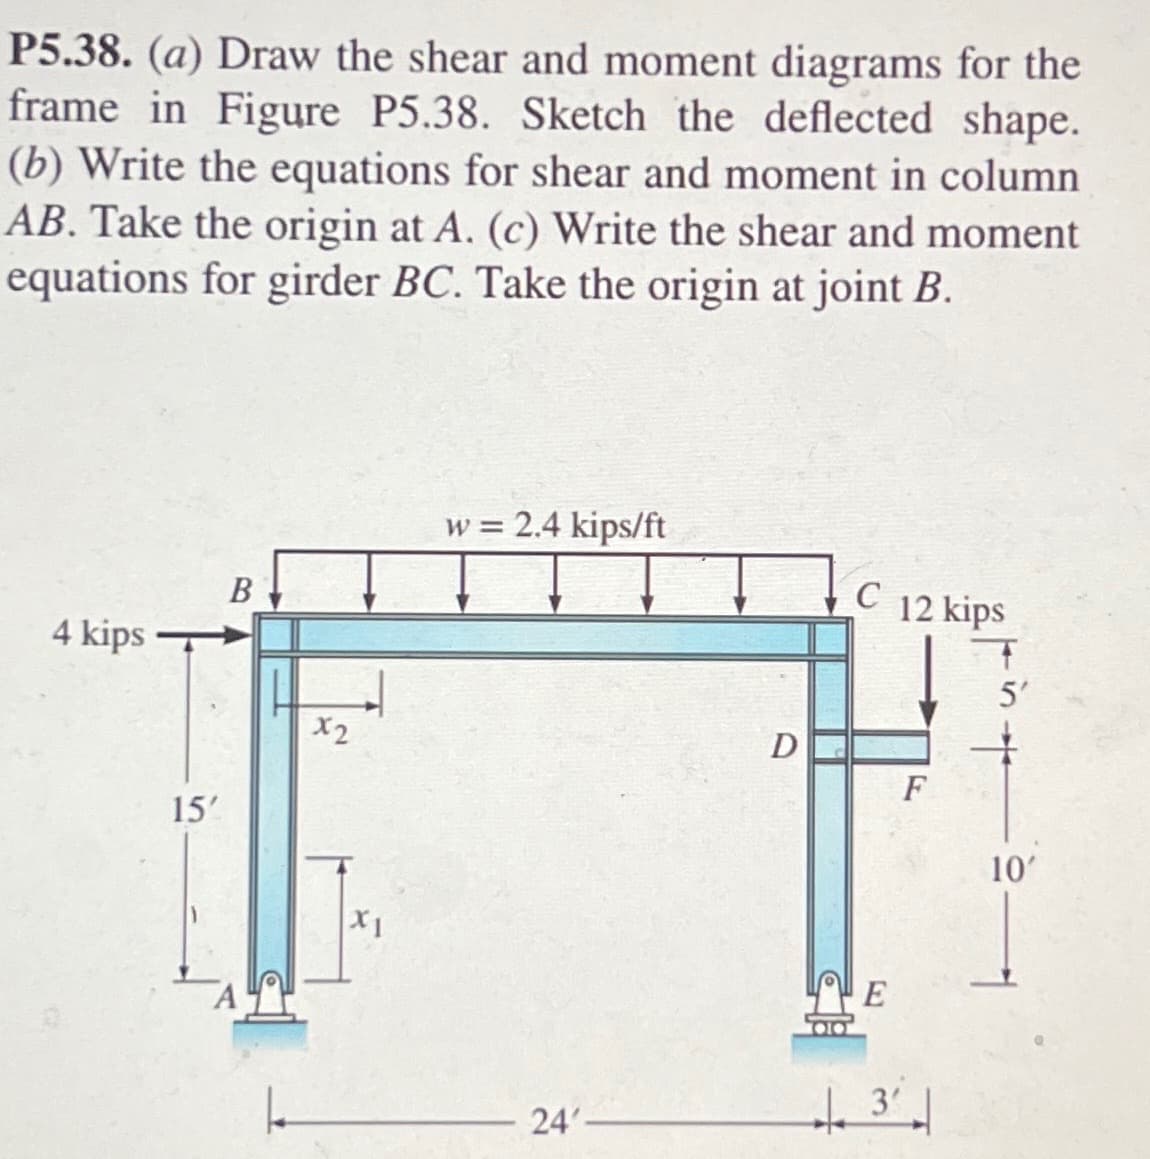 P5.38. (a) Draw the shear and moment diagrams for the
frame in Figure P5.38. Sketch the deflected shape.
(b) Write the equations for shear and moment in column
AB. Take the origin at A. (c) Write the shear and moment
equations for girder BC. Take the origin at joint B.
4 kips
15'
B
x2
XI
w = 2.4 kips/ft
24'
D
C 12 kips
E
31
T
5'
10'